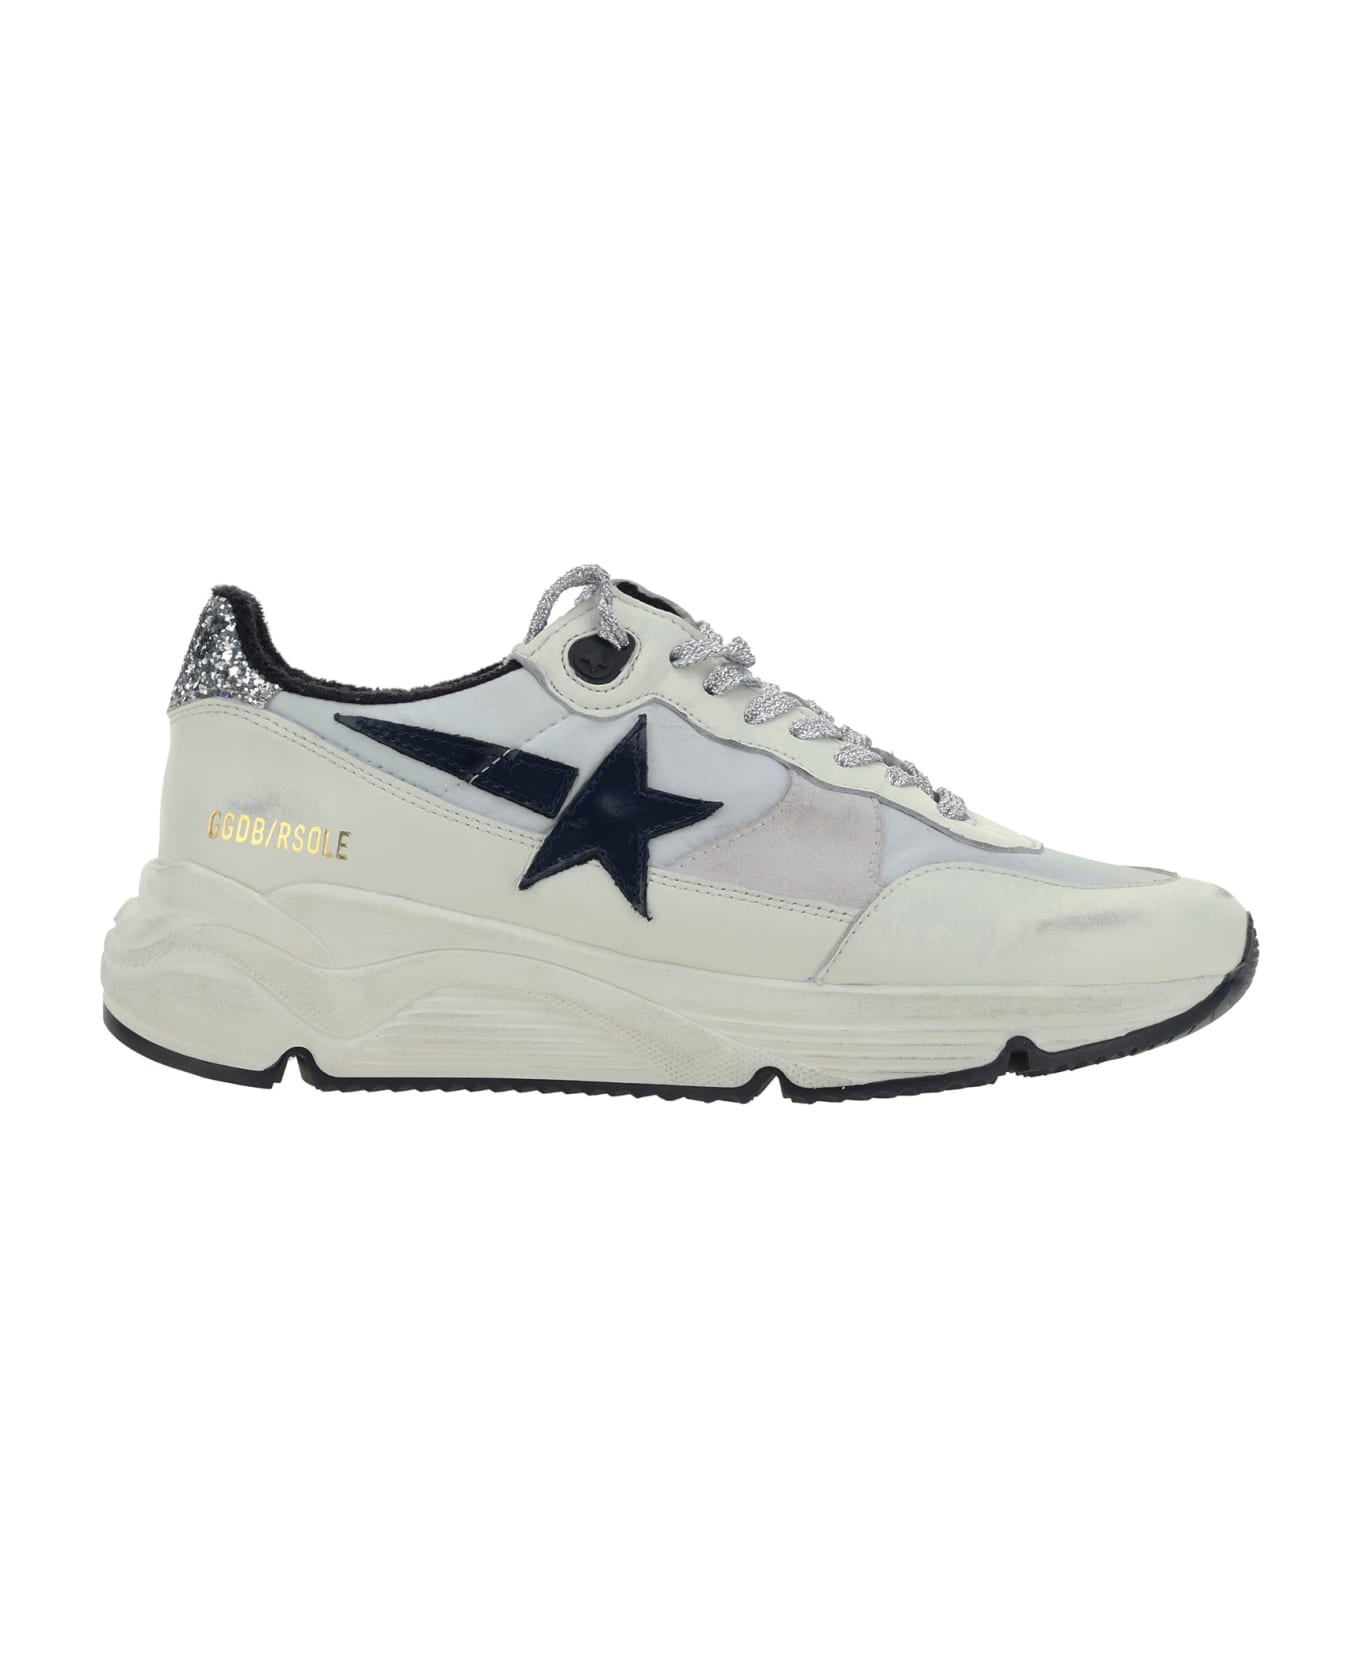 Golden Goose Running Sole Sneakers - Optic White/white/black/silver